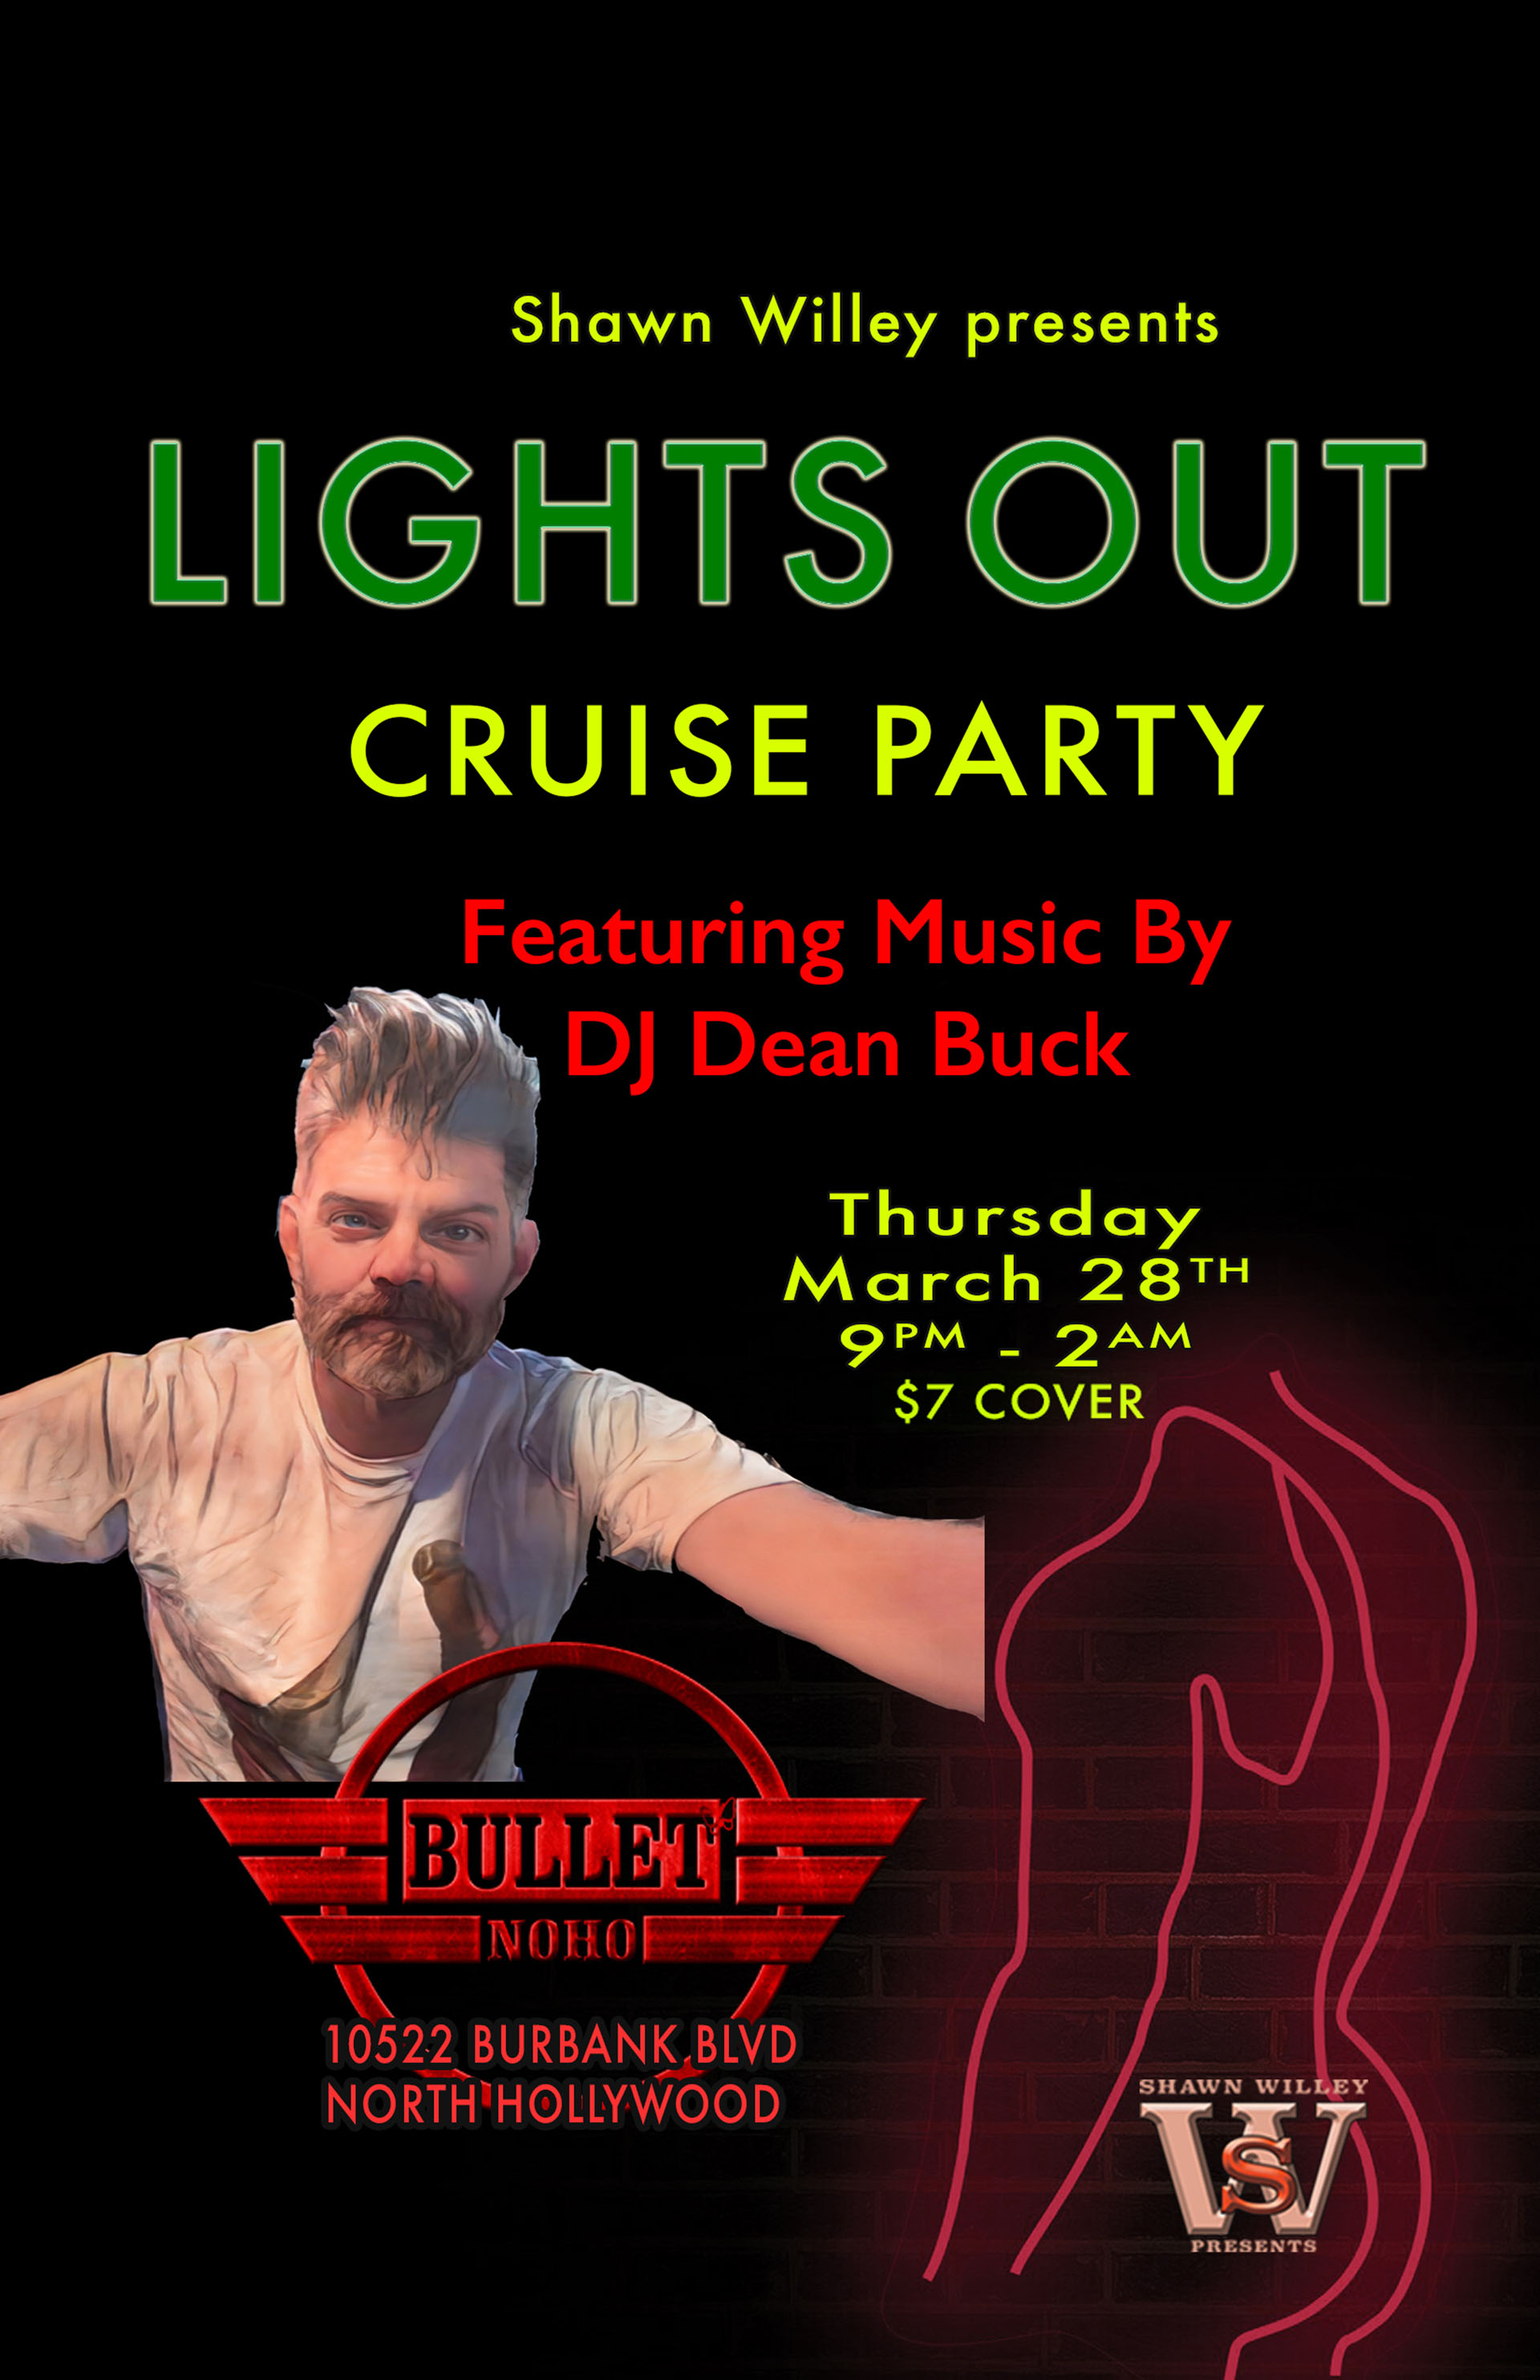 THE BULLET BAR Presents SHAWN WILLEY LIGHTS OUT CRUISE PARTY: Thursday, 03/28/24, 9:00 PM to 2:00 AM. Featuring DJ DEAN BUCK. $7 cover.